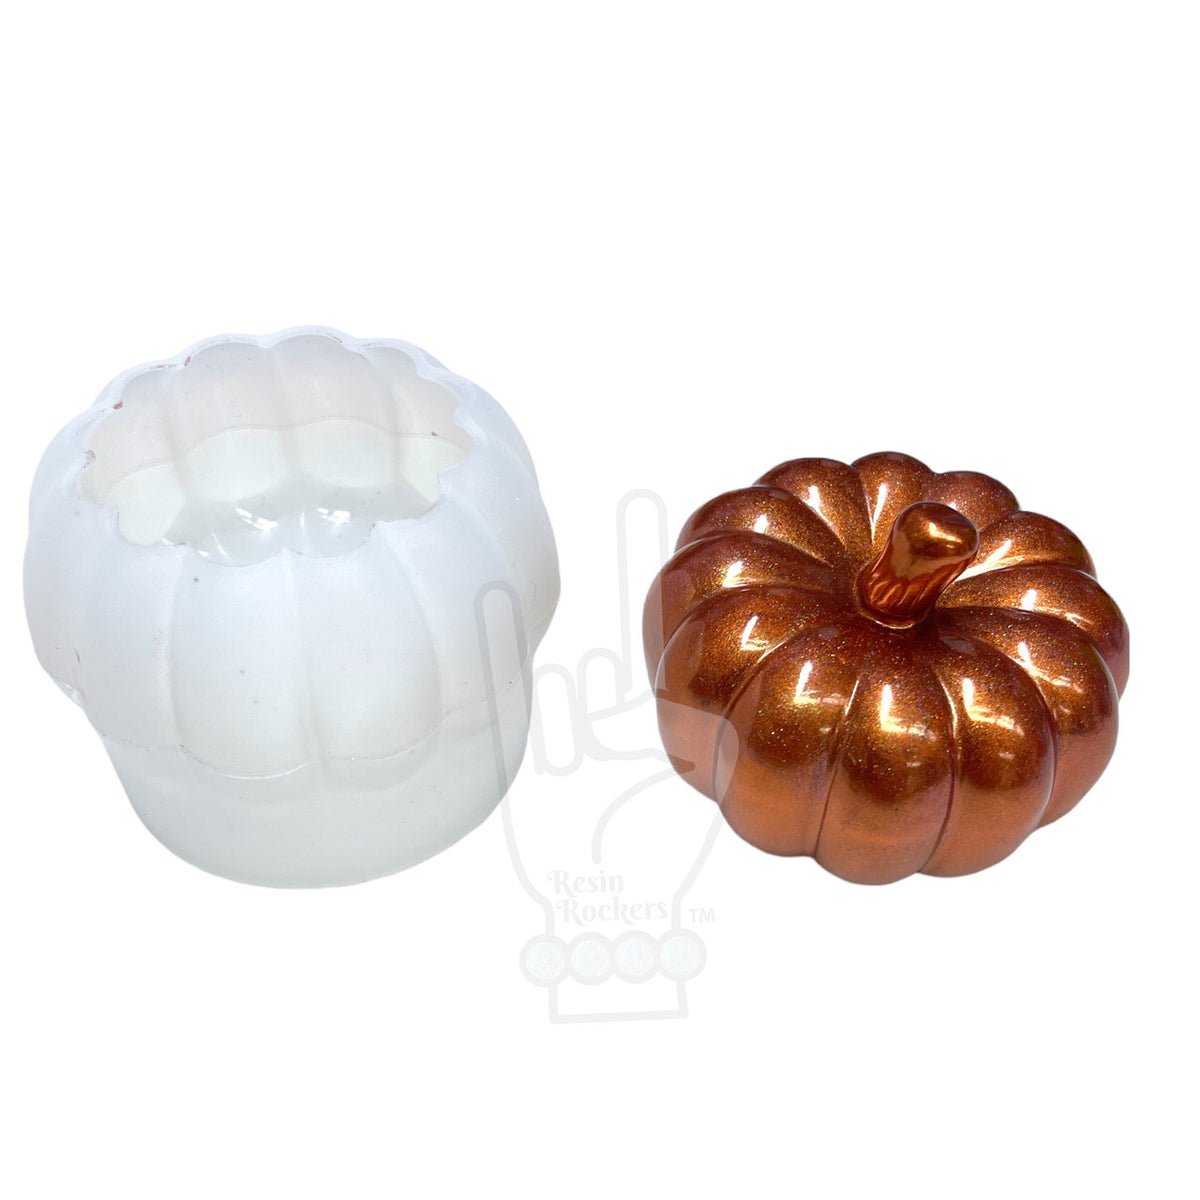 3D Pumpkin 2 inch Silicone Mold for Epoxy Resin Art